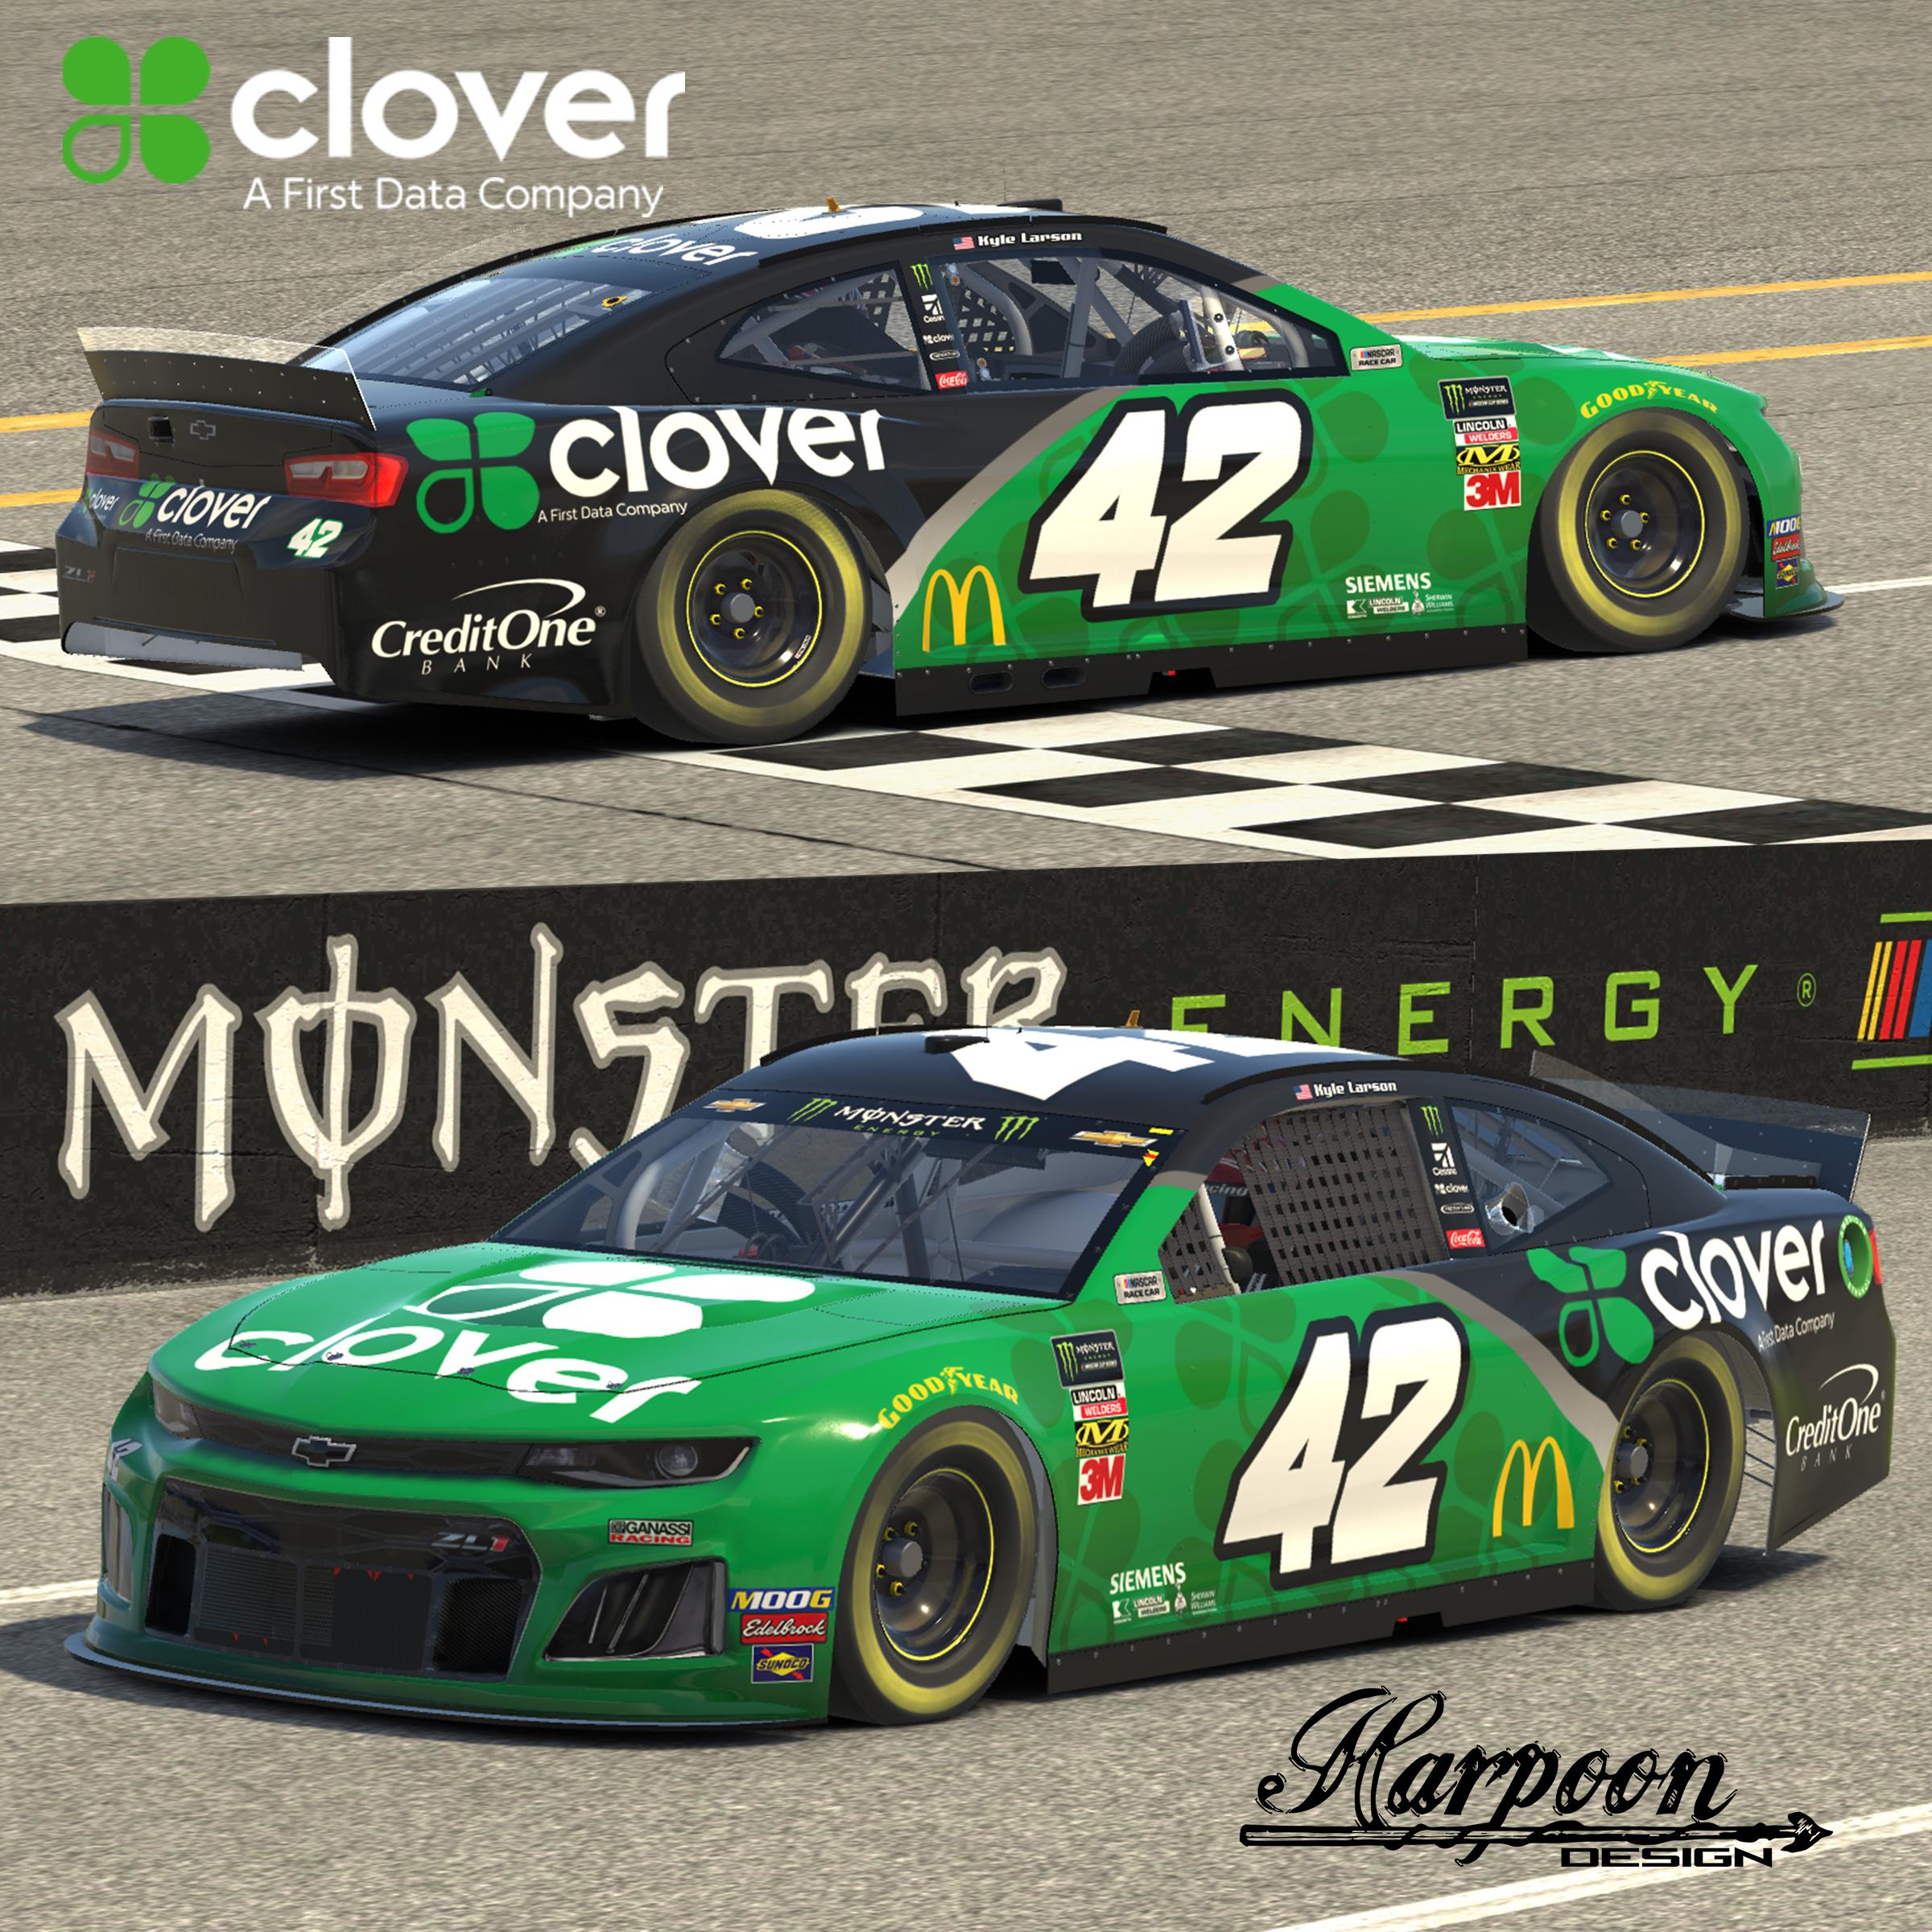 Preview of 2019 Kyle Larson First Data Clover Camaro no num by Brantley Roden